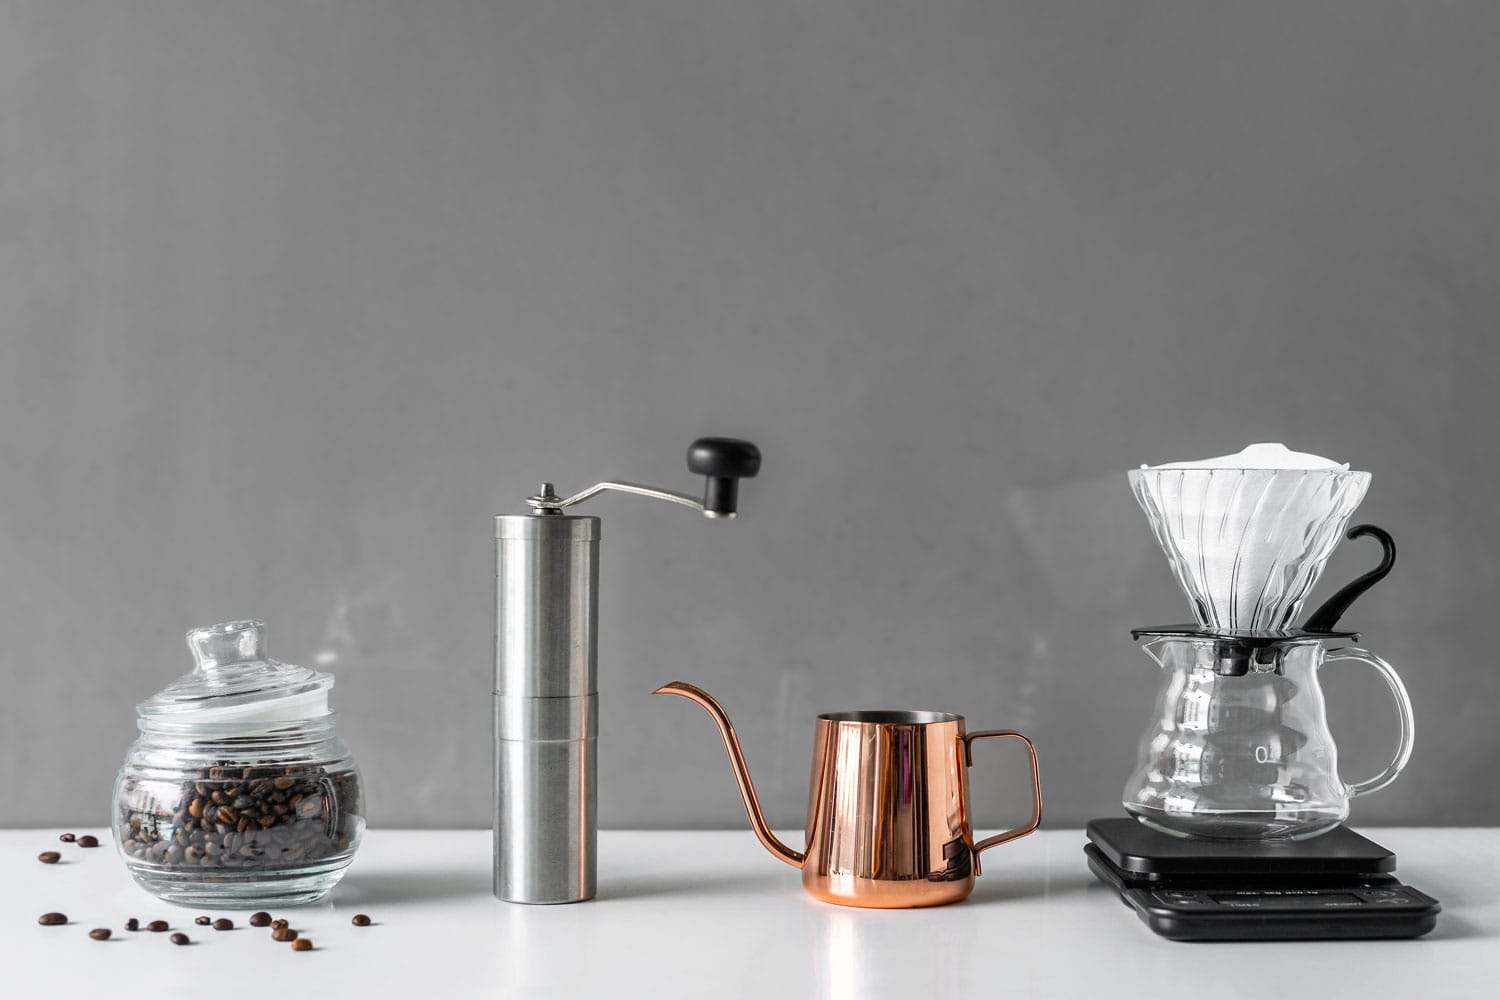 Coffee brewing tools in modern style for homemade on white table